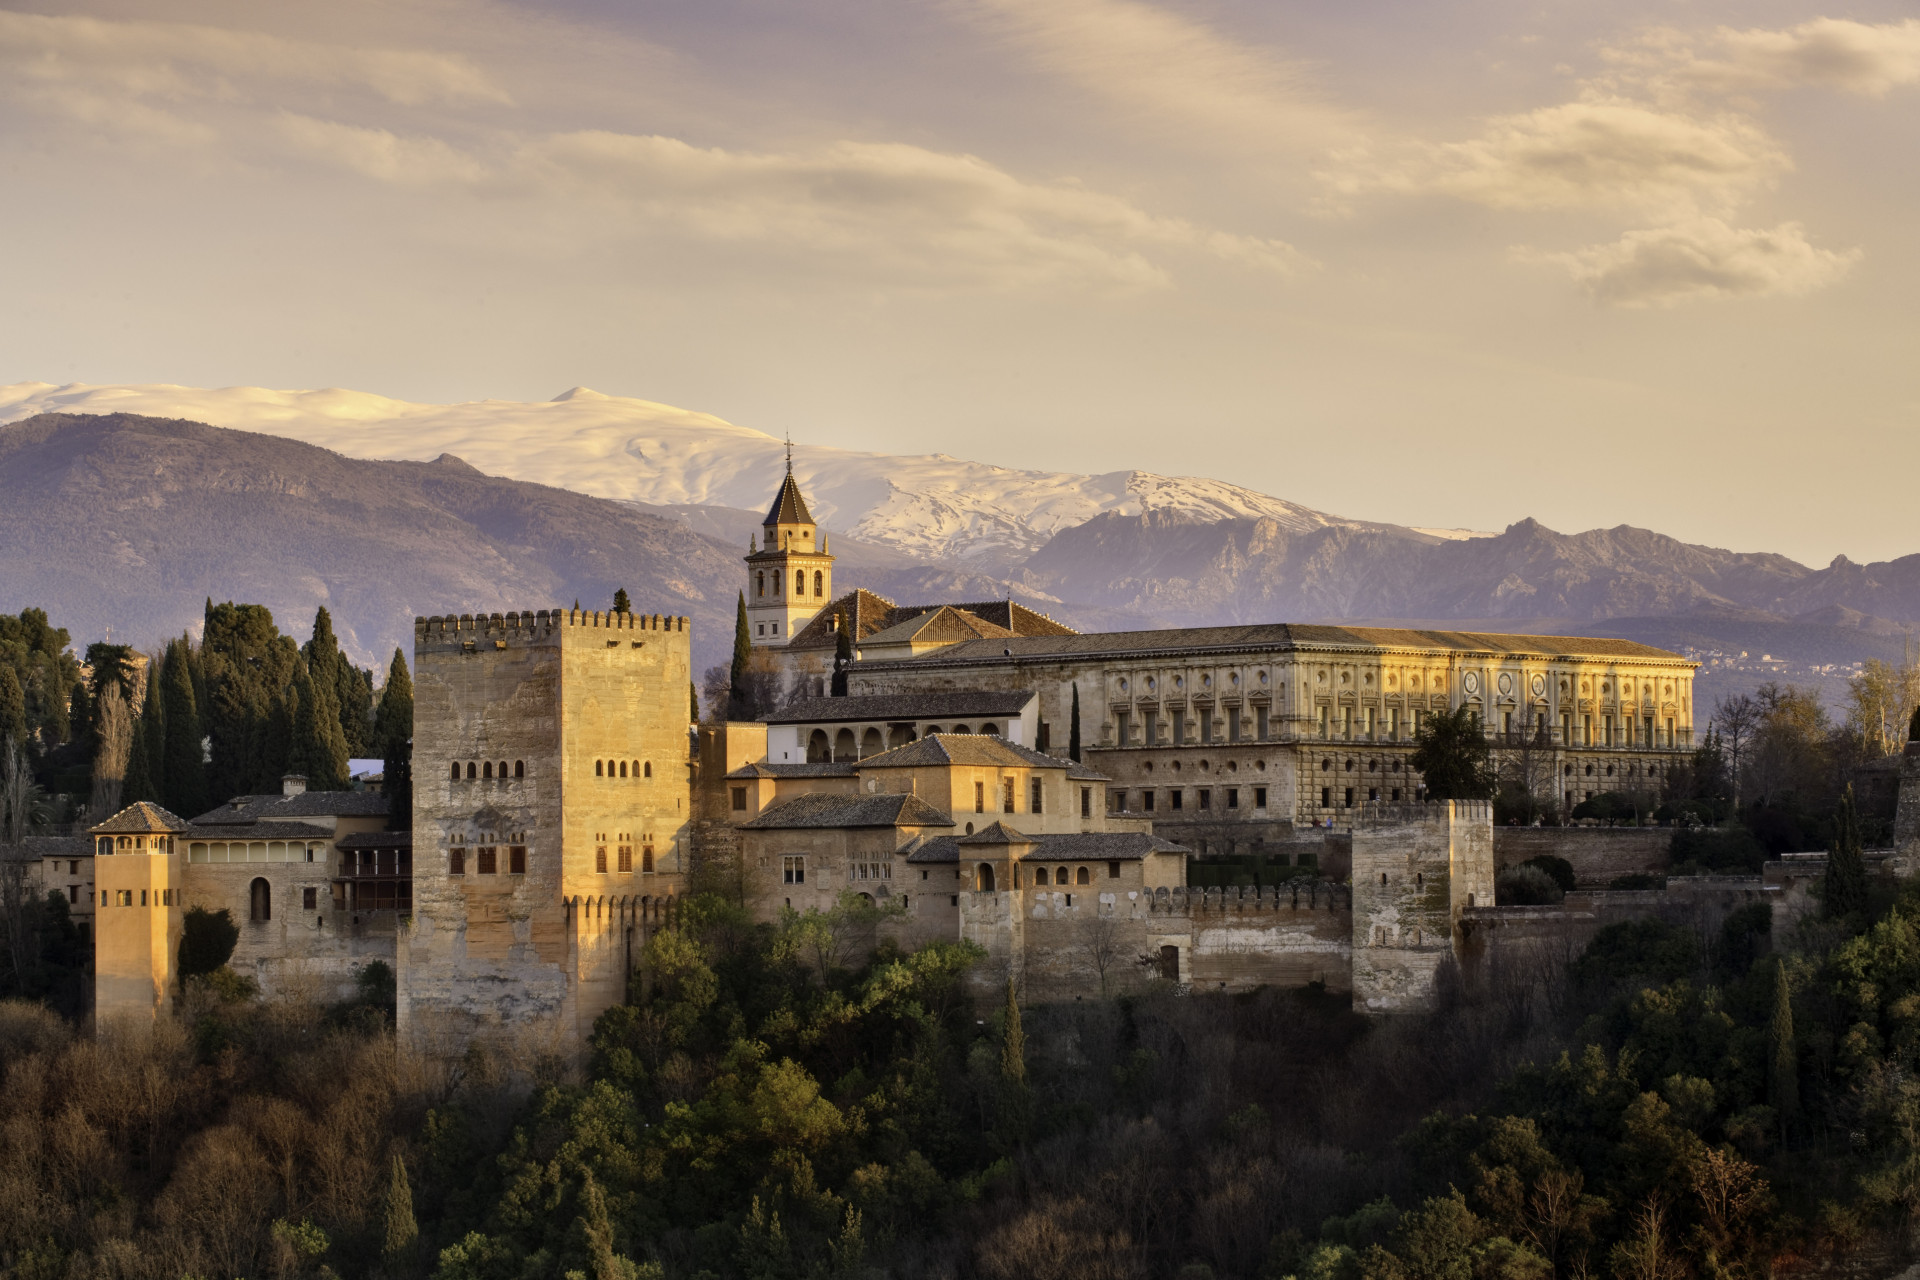 In the Spanish region of Andalusia you'll find Granada. The city is famous for its old fortress known as Alhambra, which holds traces of Islamic culture.